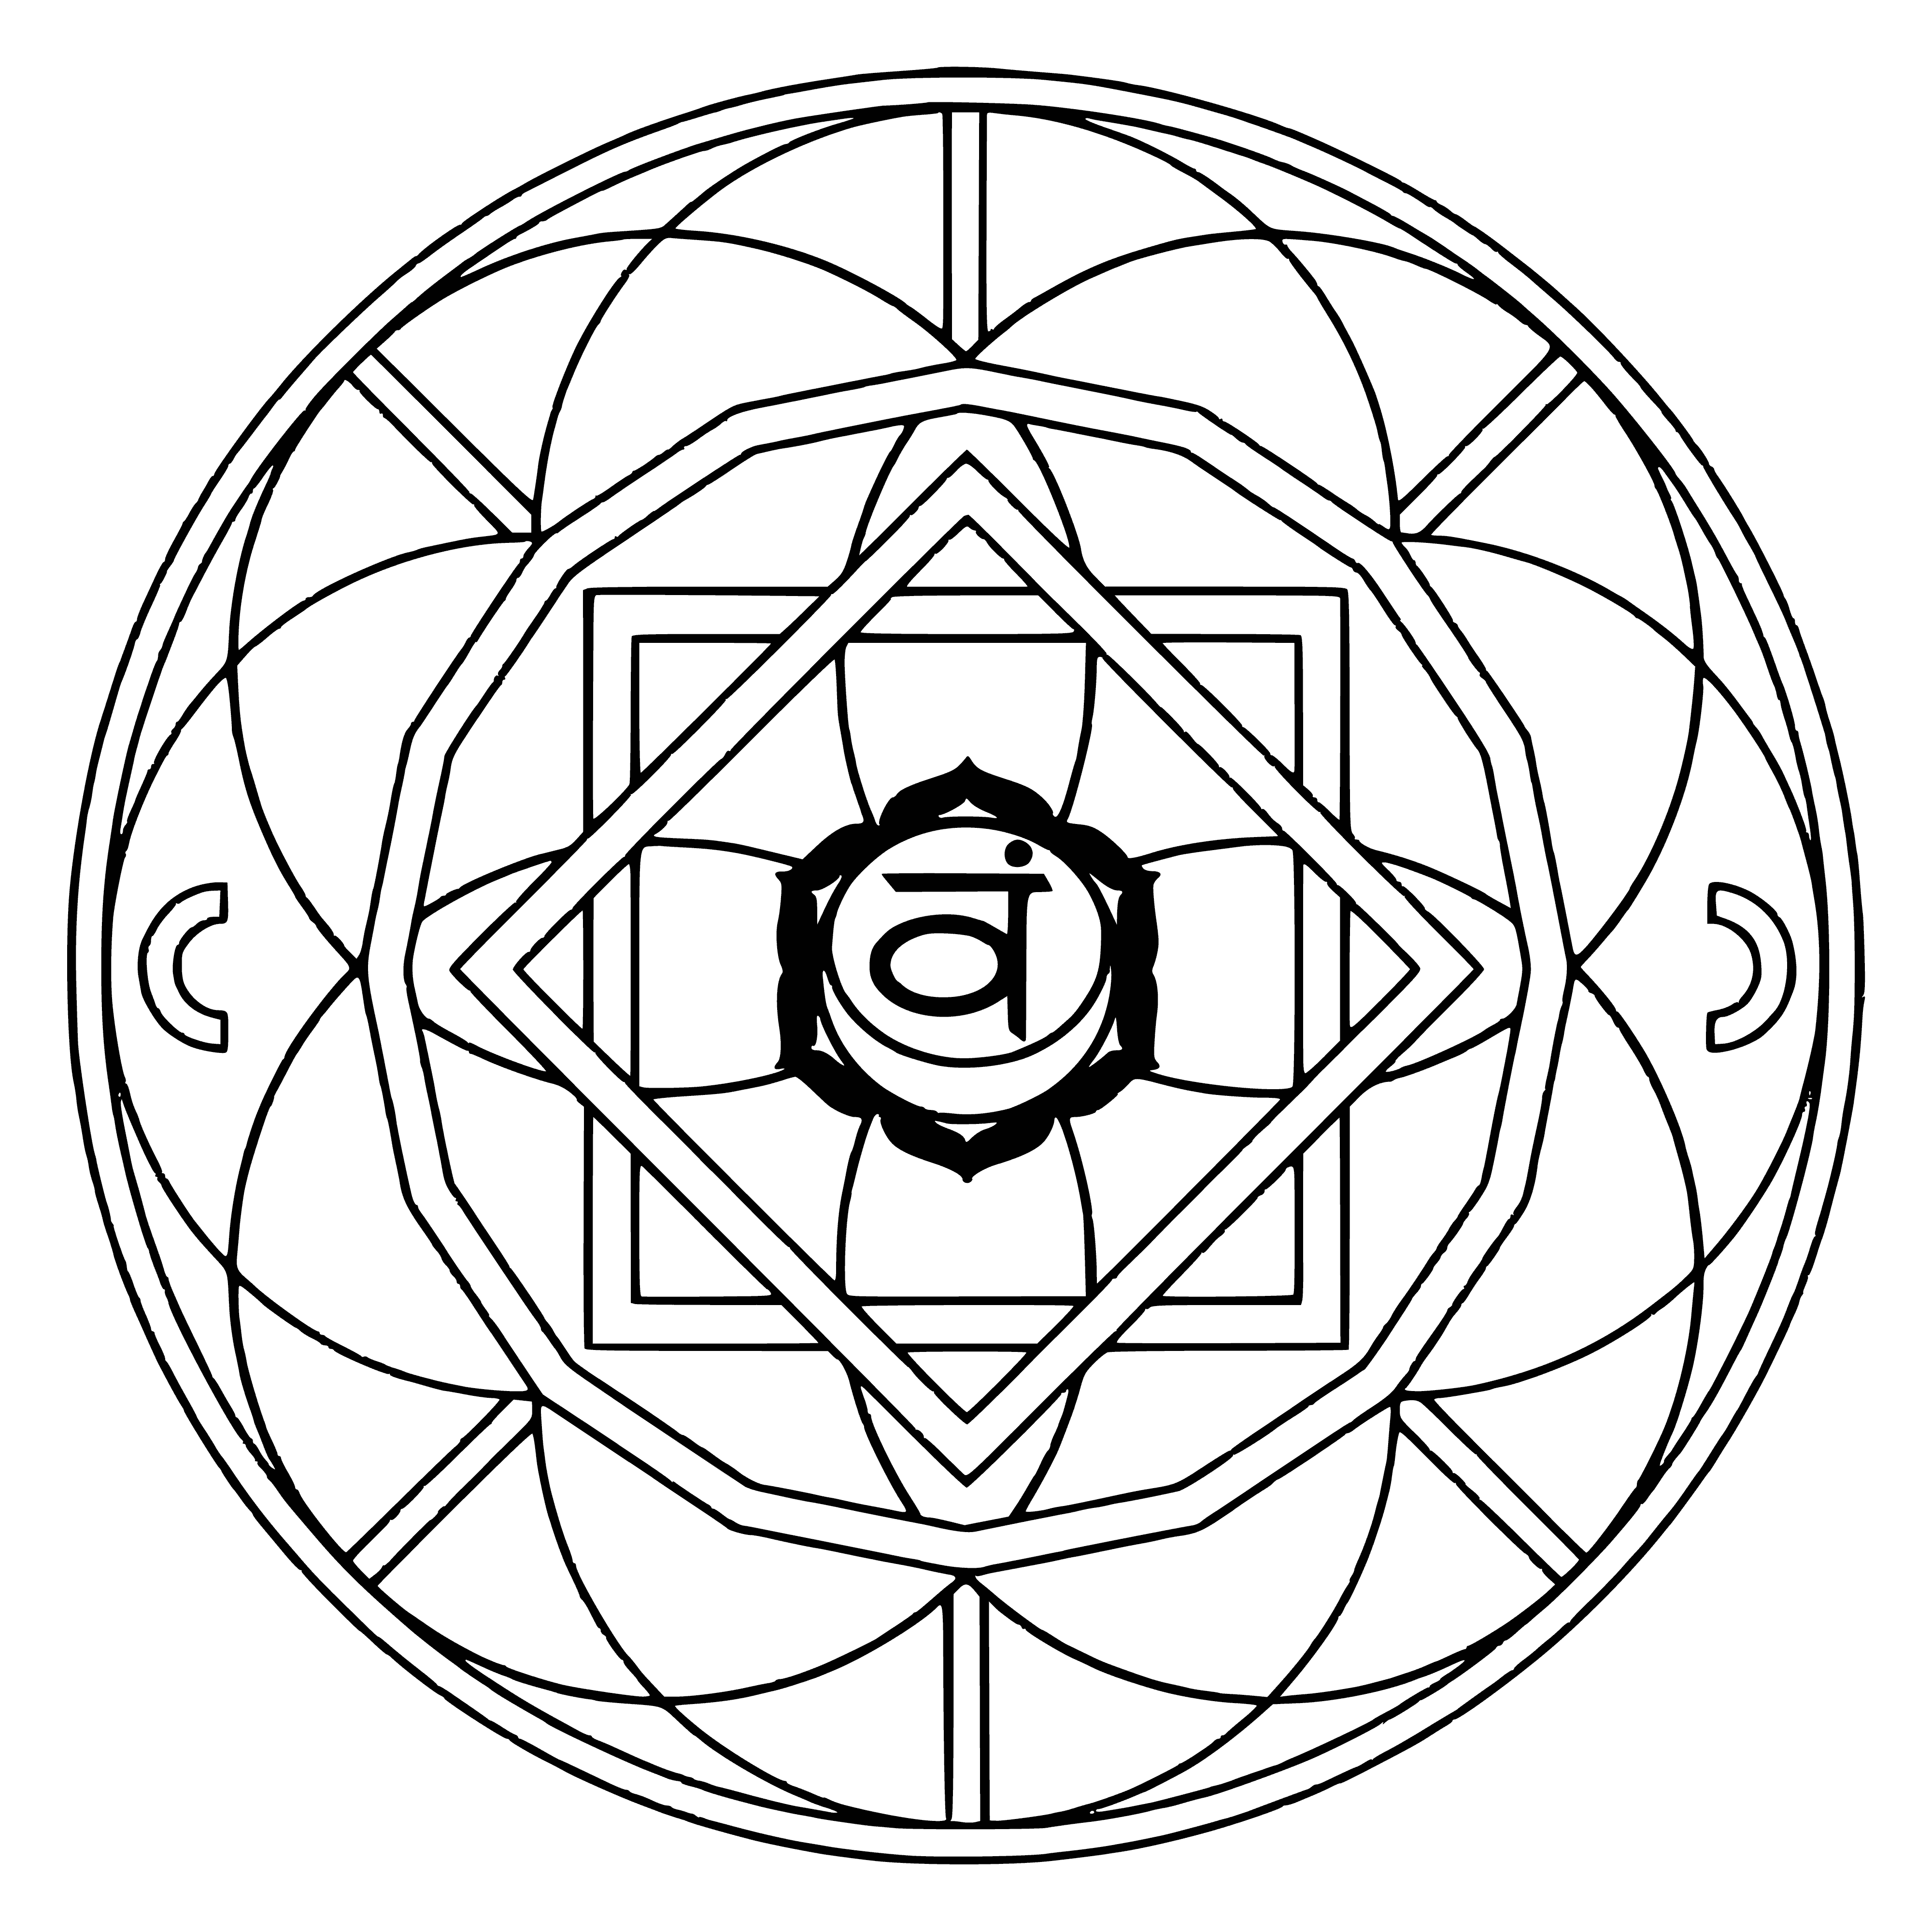 coloring page: Mandala showing Svadhisthana chakra: Lotus with 6 petals (orange & white) & cube (earth element) in the center, flowing with 4 rivers (earth, water, fire, air), representing 6 senses (sight, sound, smell, taste, touch, intuition). #yogaphilosophy #mandala